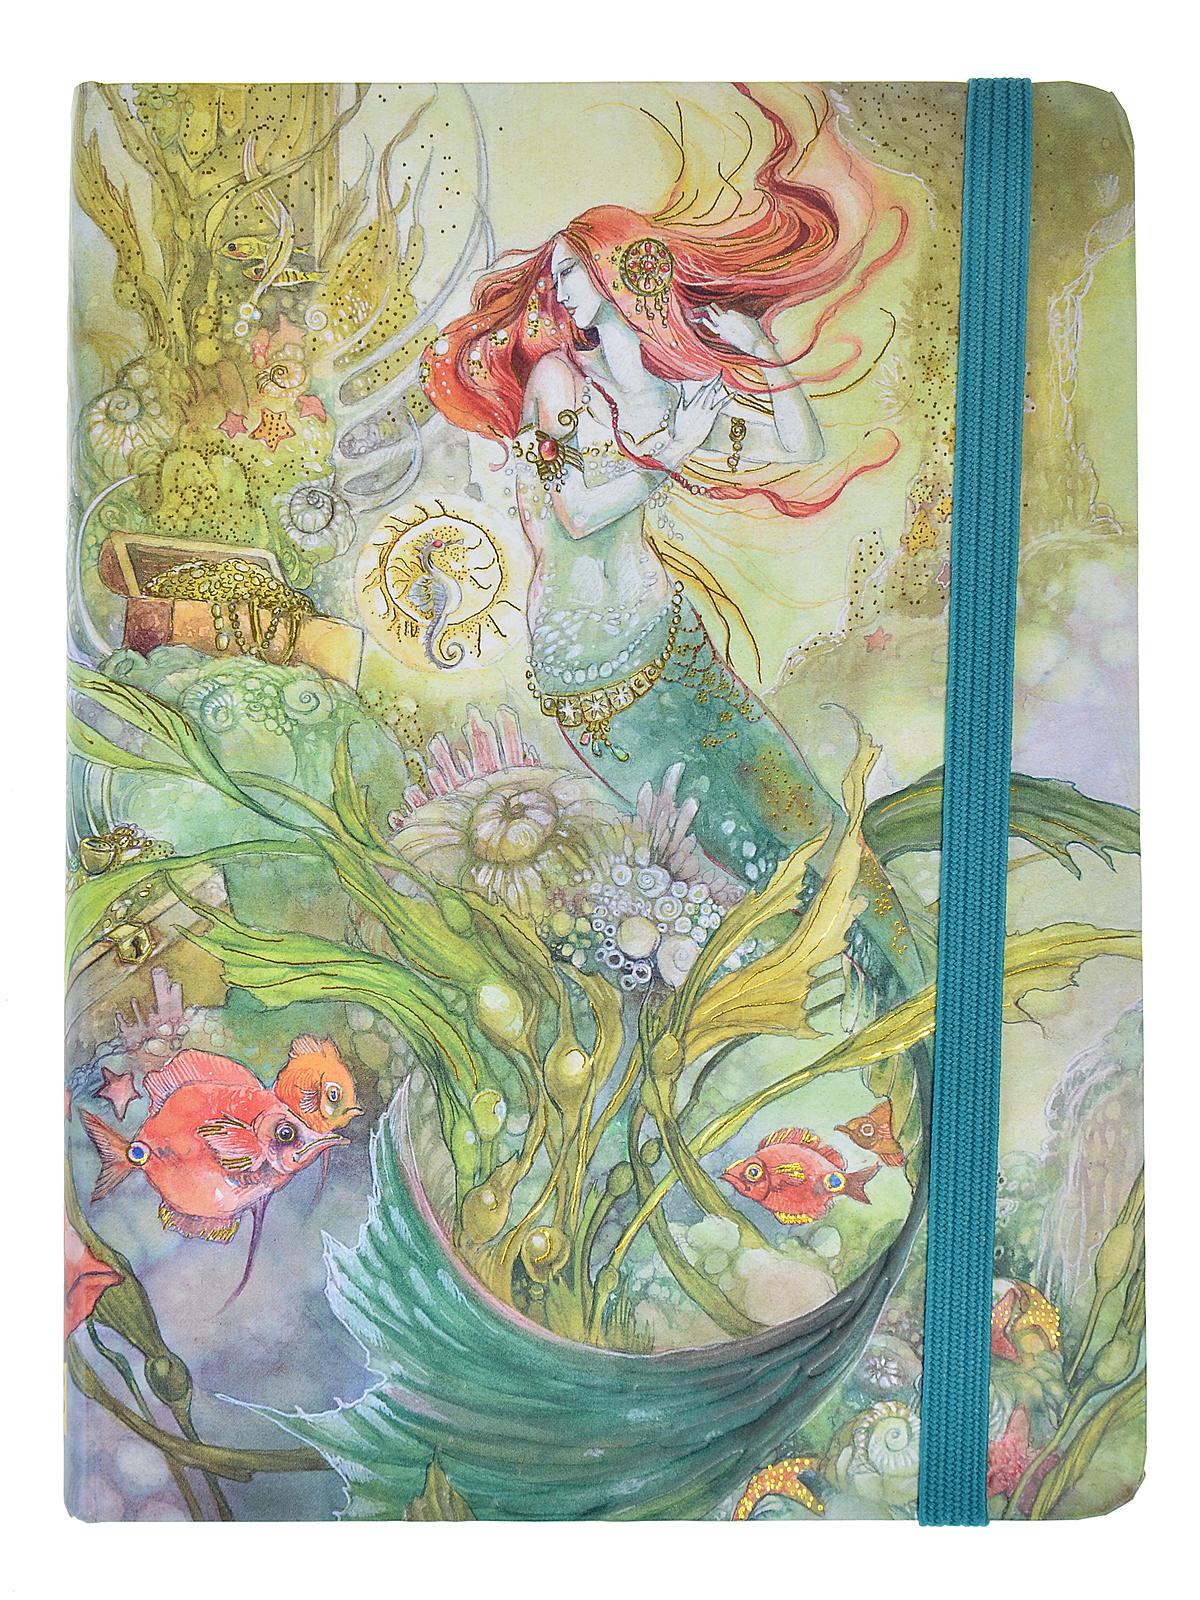 Mid-size Journals Mermaid 6 1 4 In. X 8 1 4 In. 160 Pages, Lined